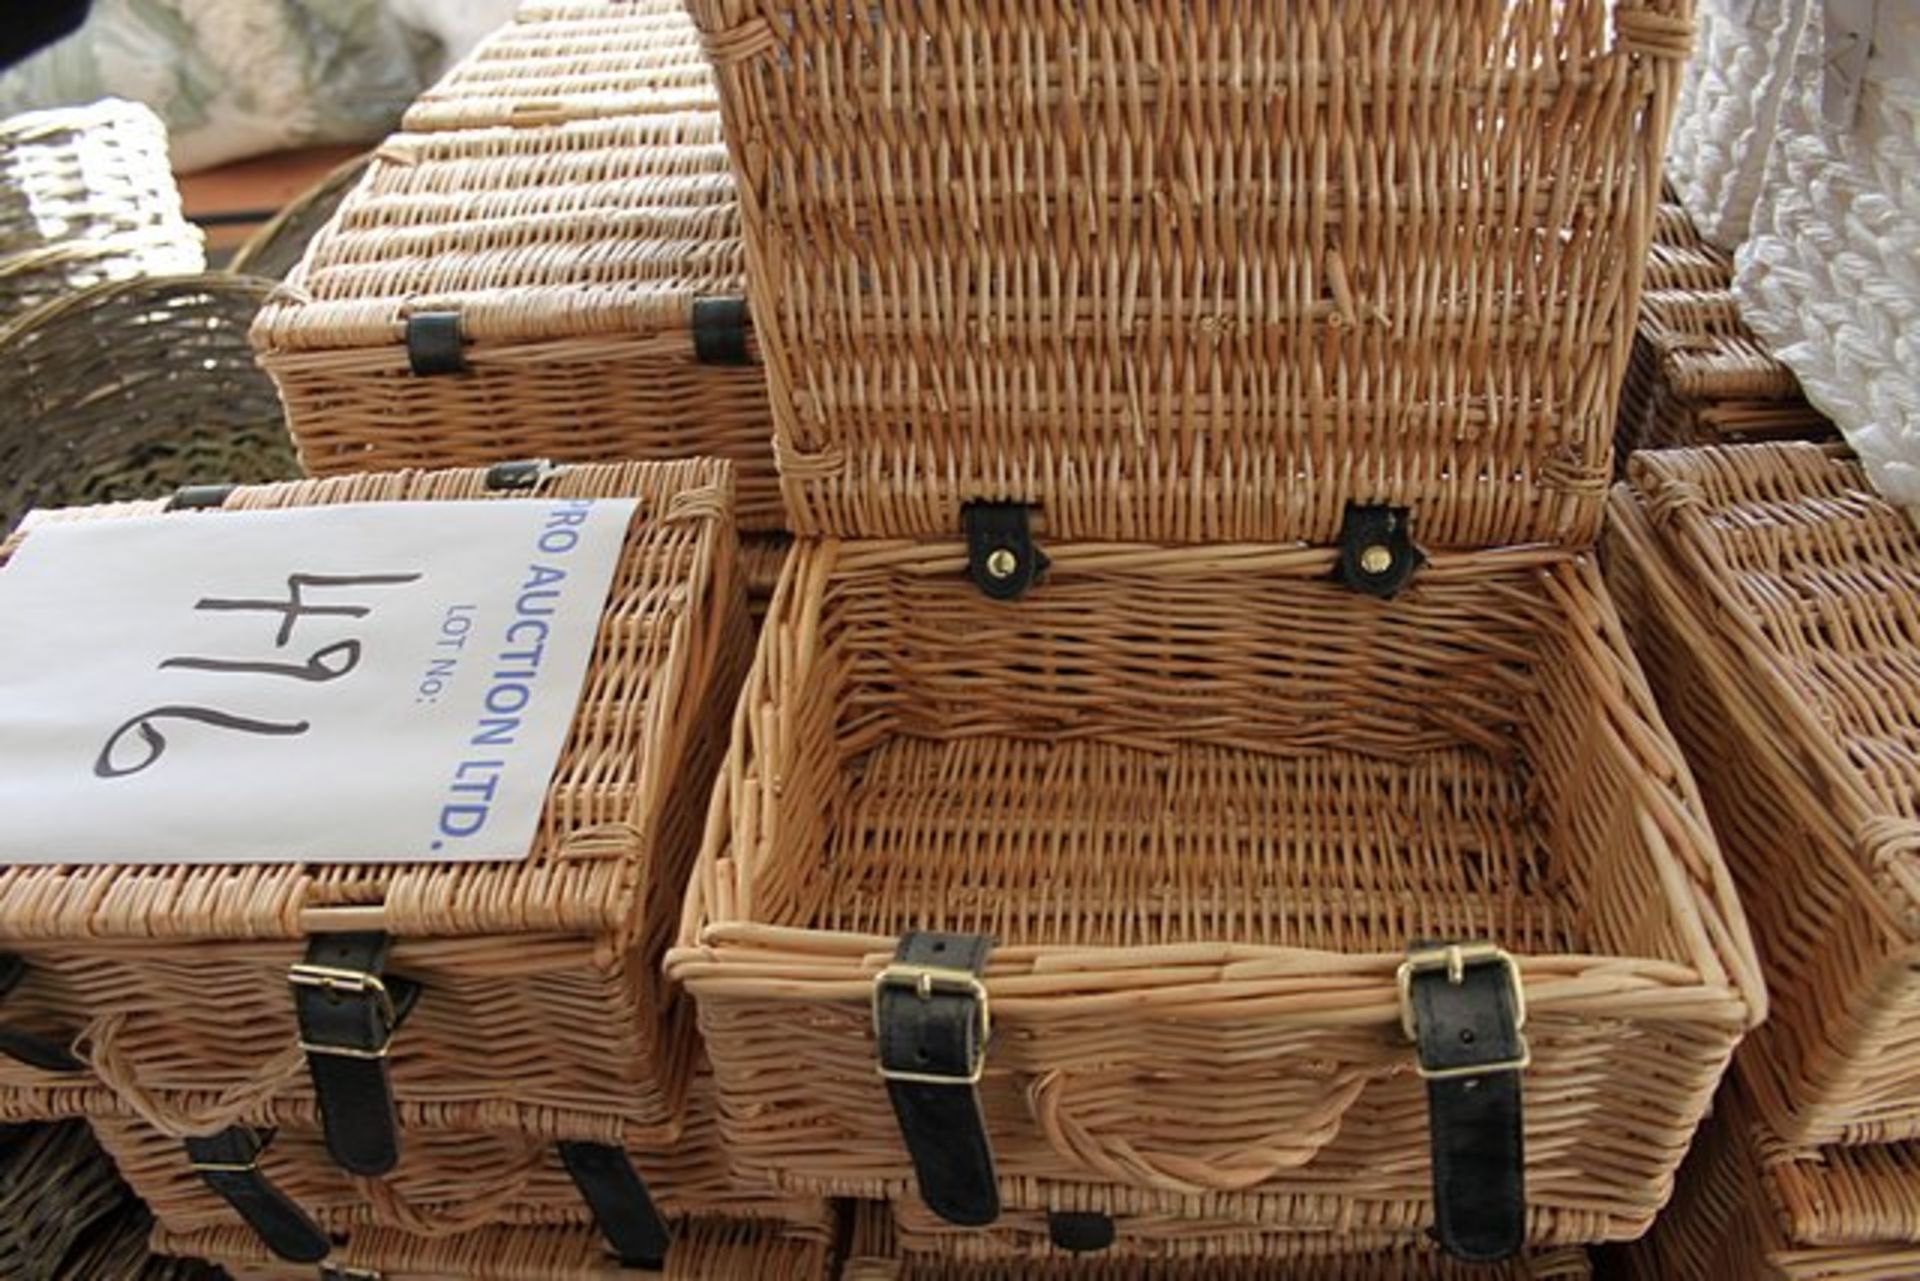 Approximately 60 x wicker picnic baskets and wicker bread baskets - Image 3 of 4